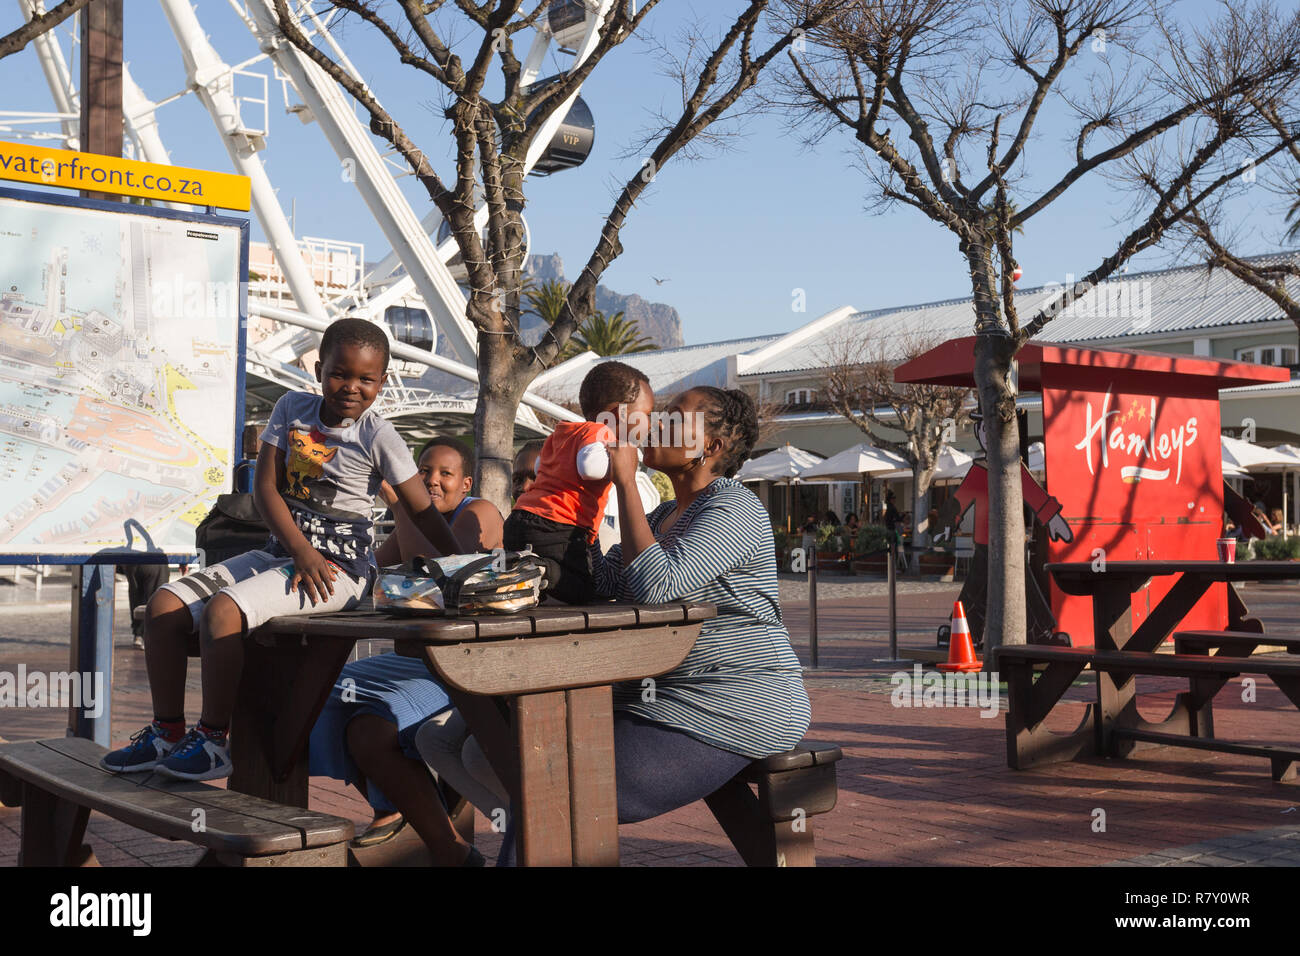 affectionate woman and toddler bonding together seated at a wooden bench outdoors at the V&A Waterfront, Cape Town together with other family members Stock Photo